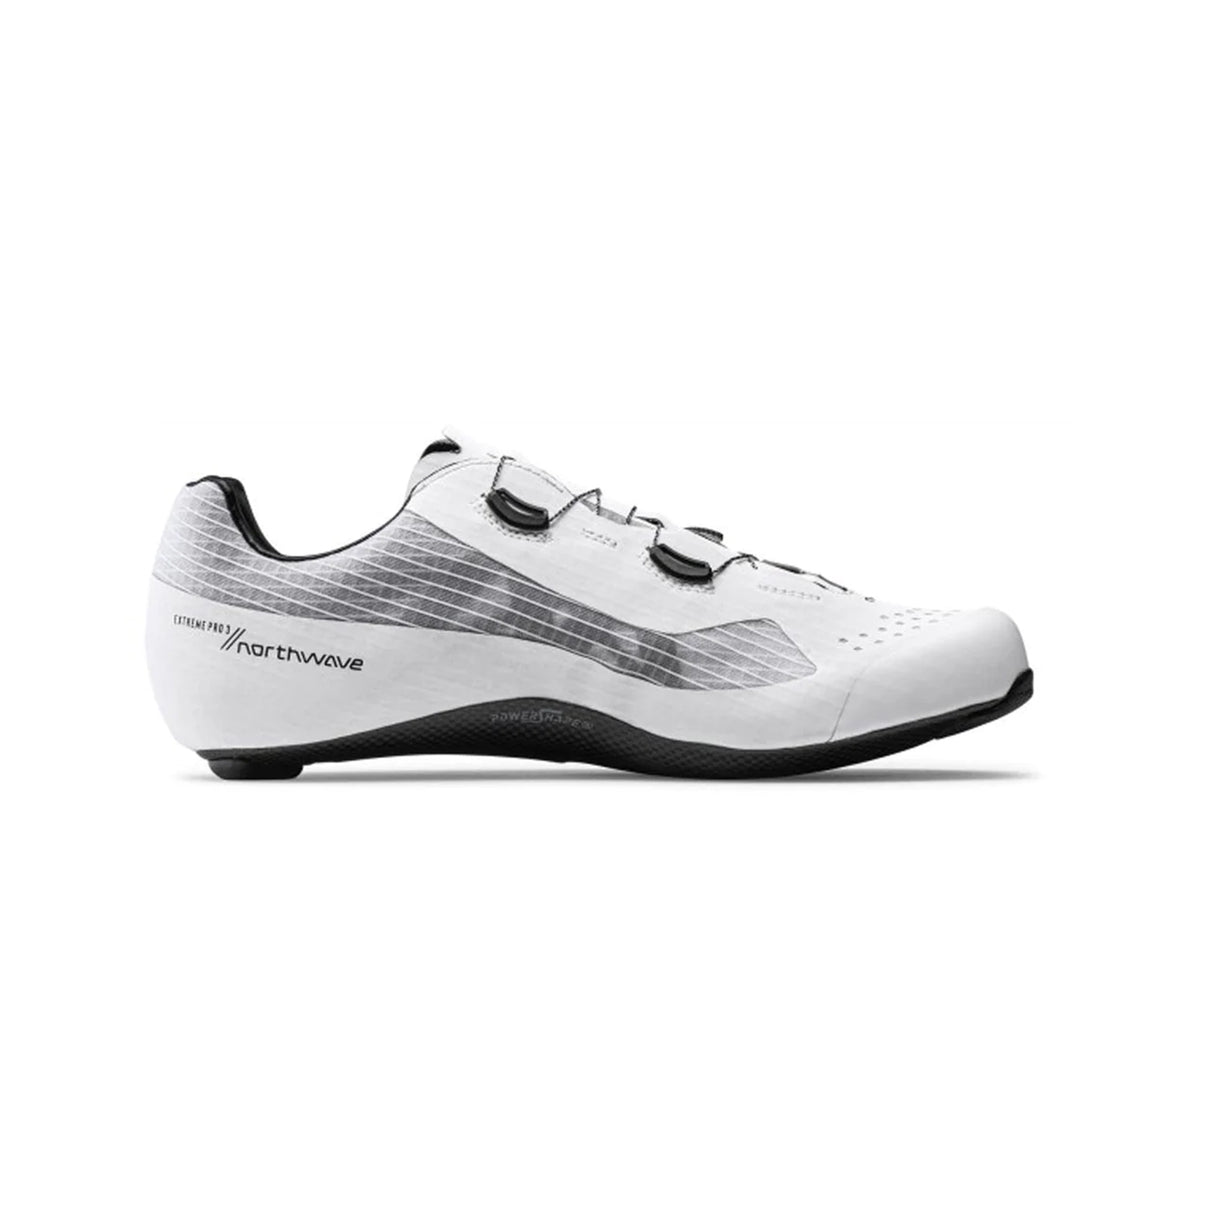 Northwave Extreme Pro 3 Road Shoes